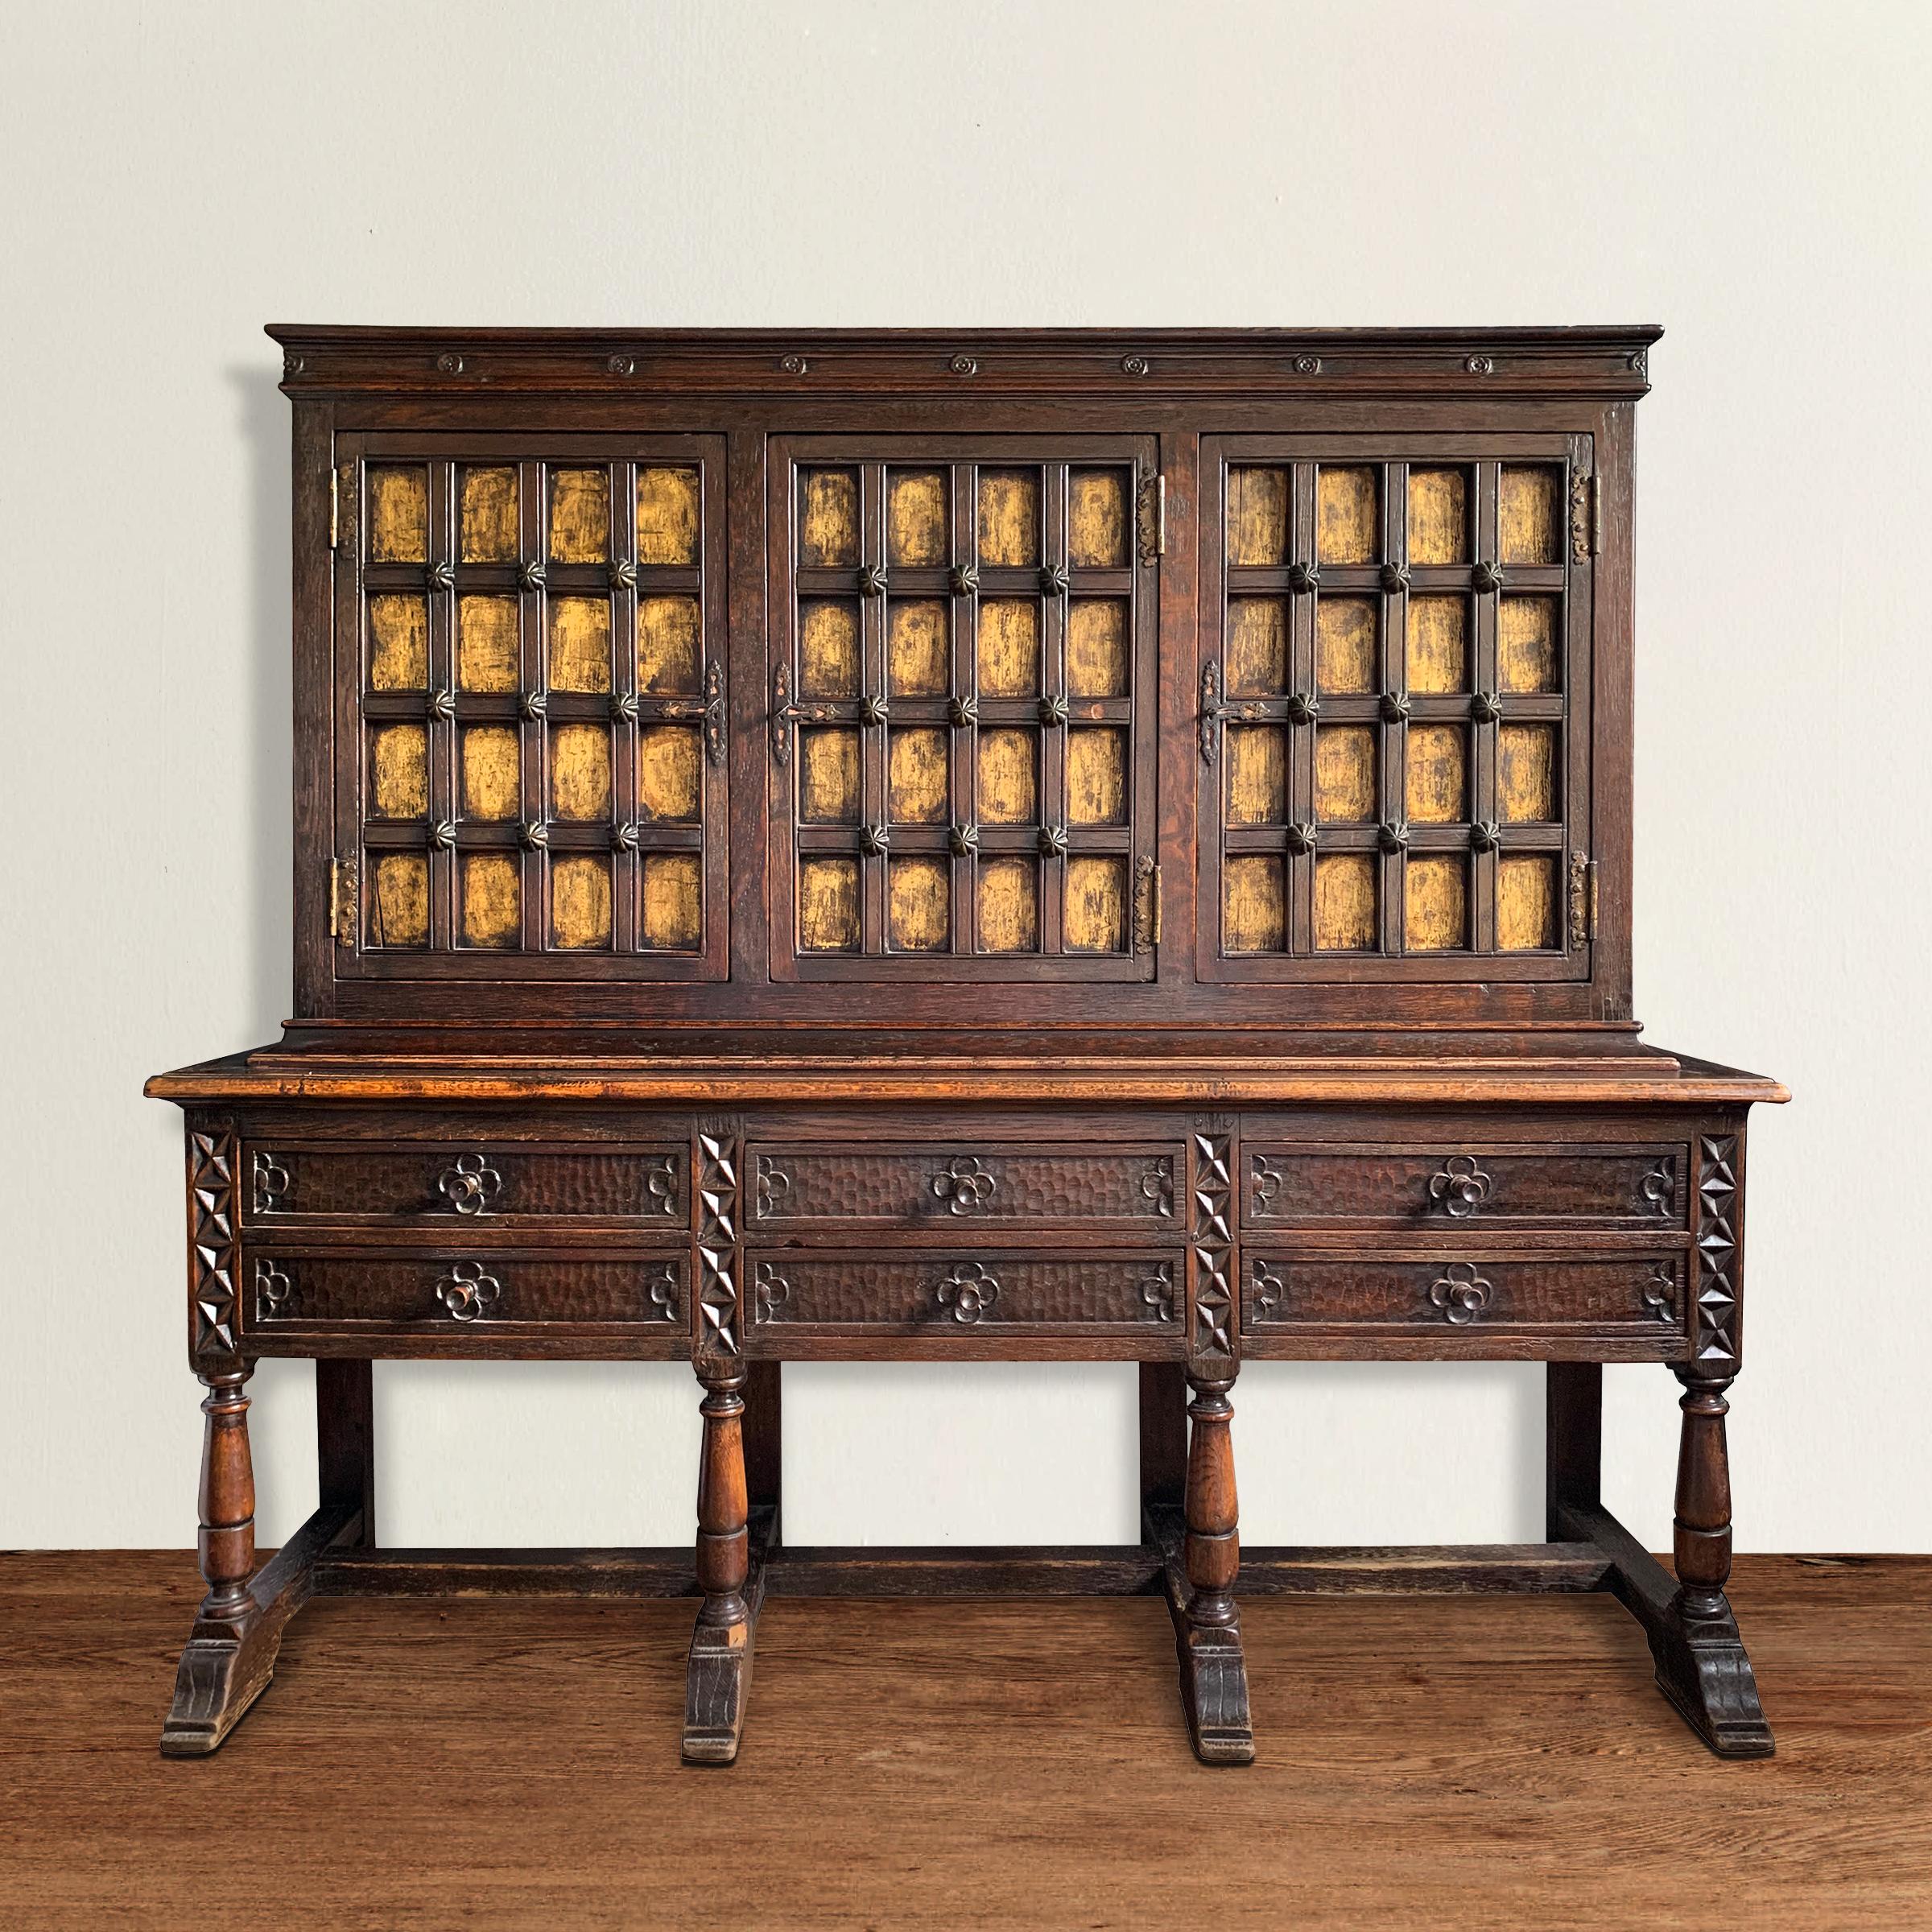 A wonderful early 20th century English Tudor Revival oak cabinet with three doors, each with raised lattice frames with heavy iron nail heads, backed with gold leaf panels, and retaining their original locks and keys. Six drawers below with chip